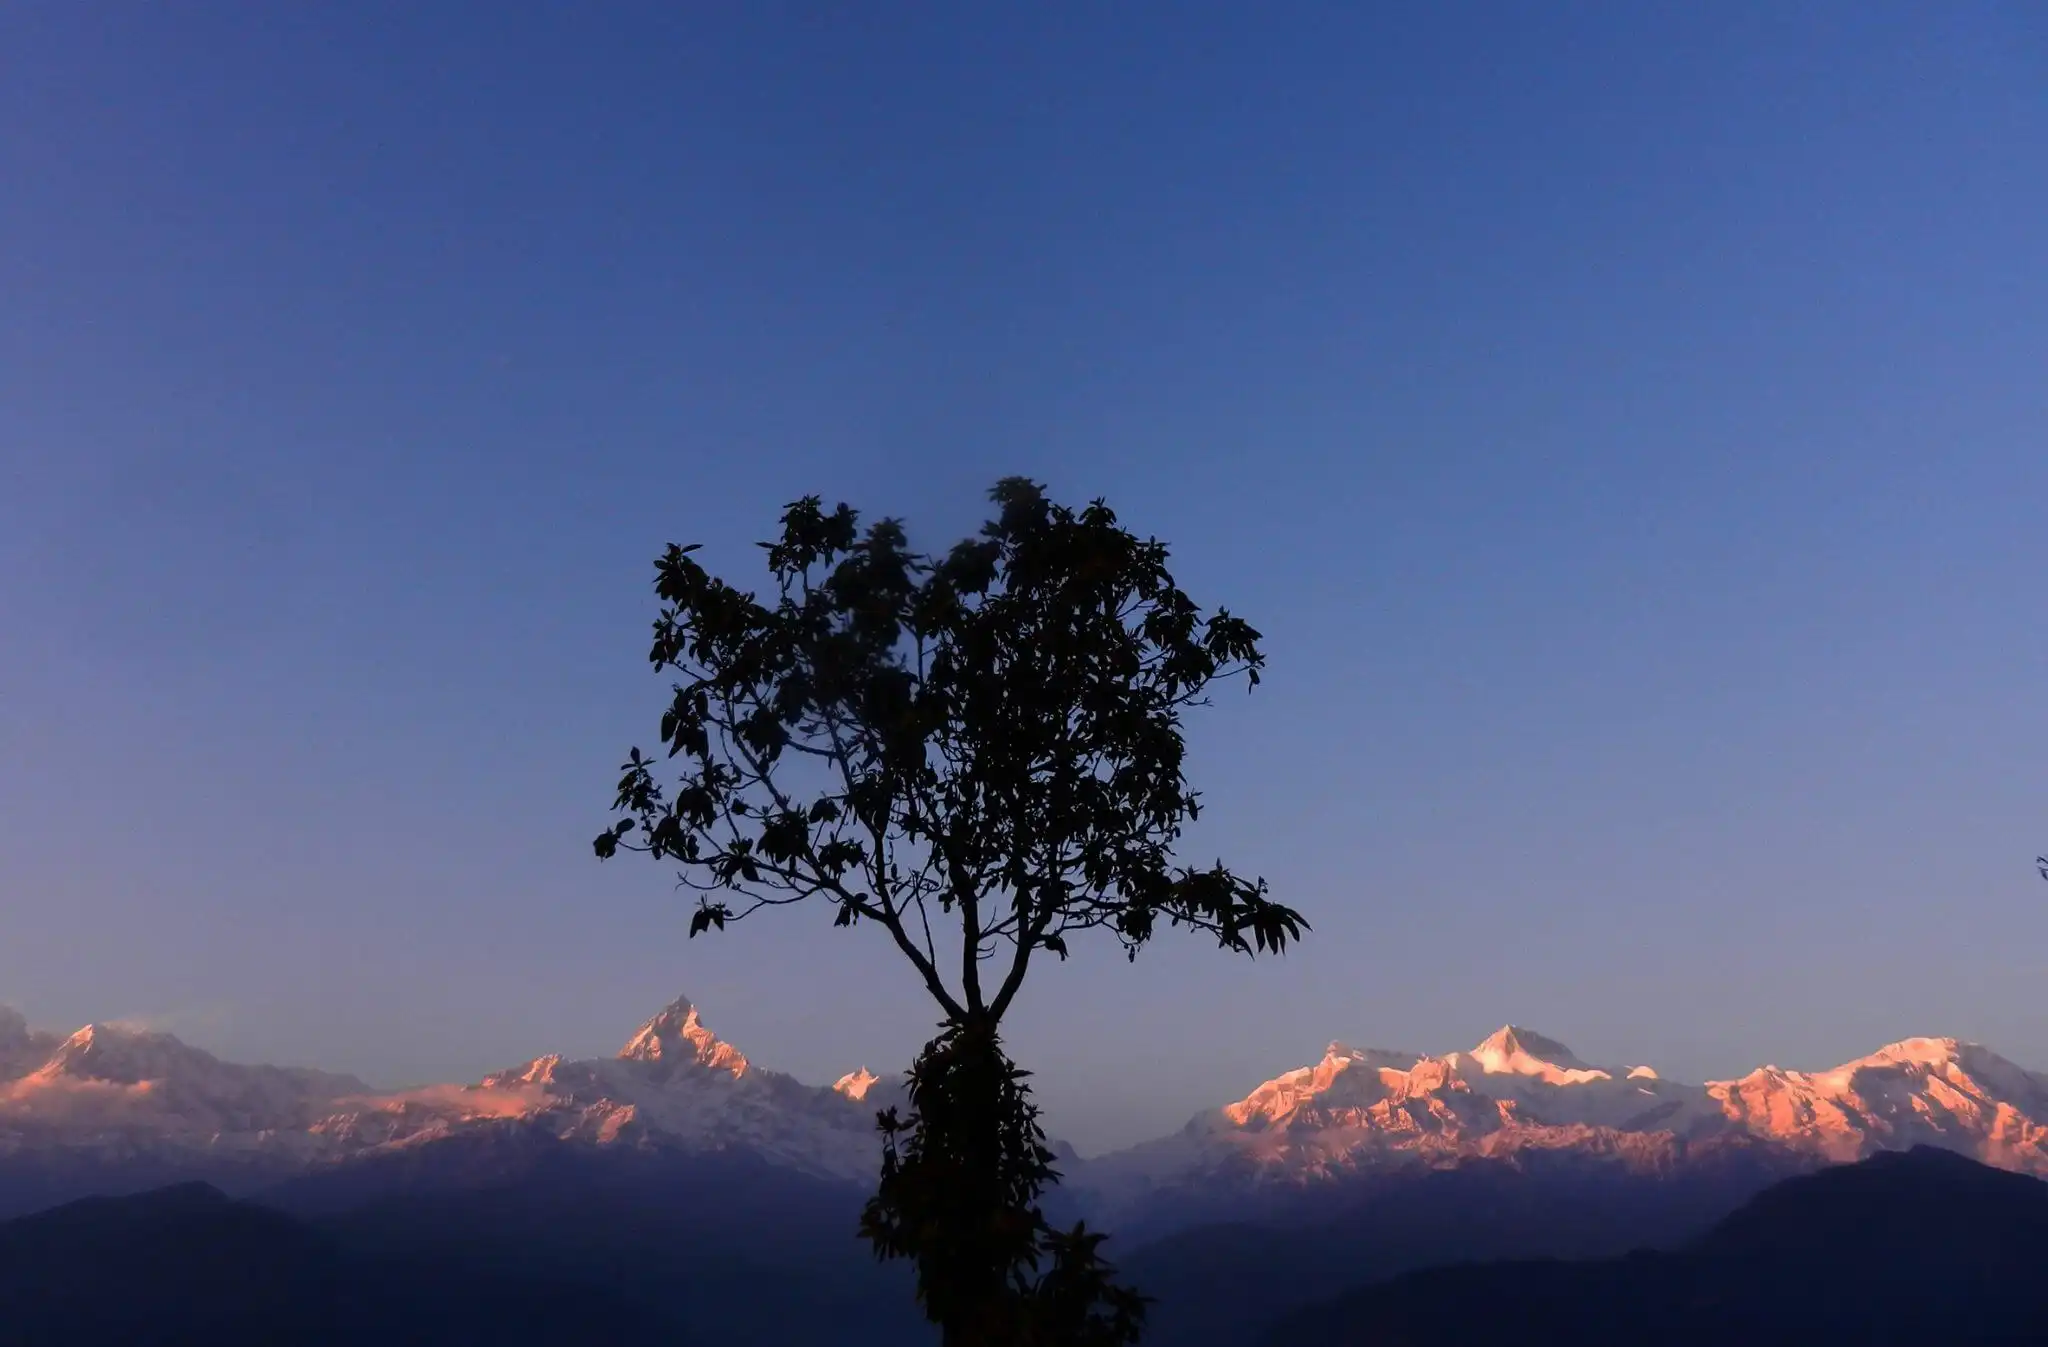 Sunrise on Snow capped Himalayas seen past a tree in the middle of the photo